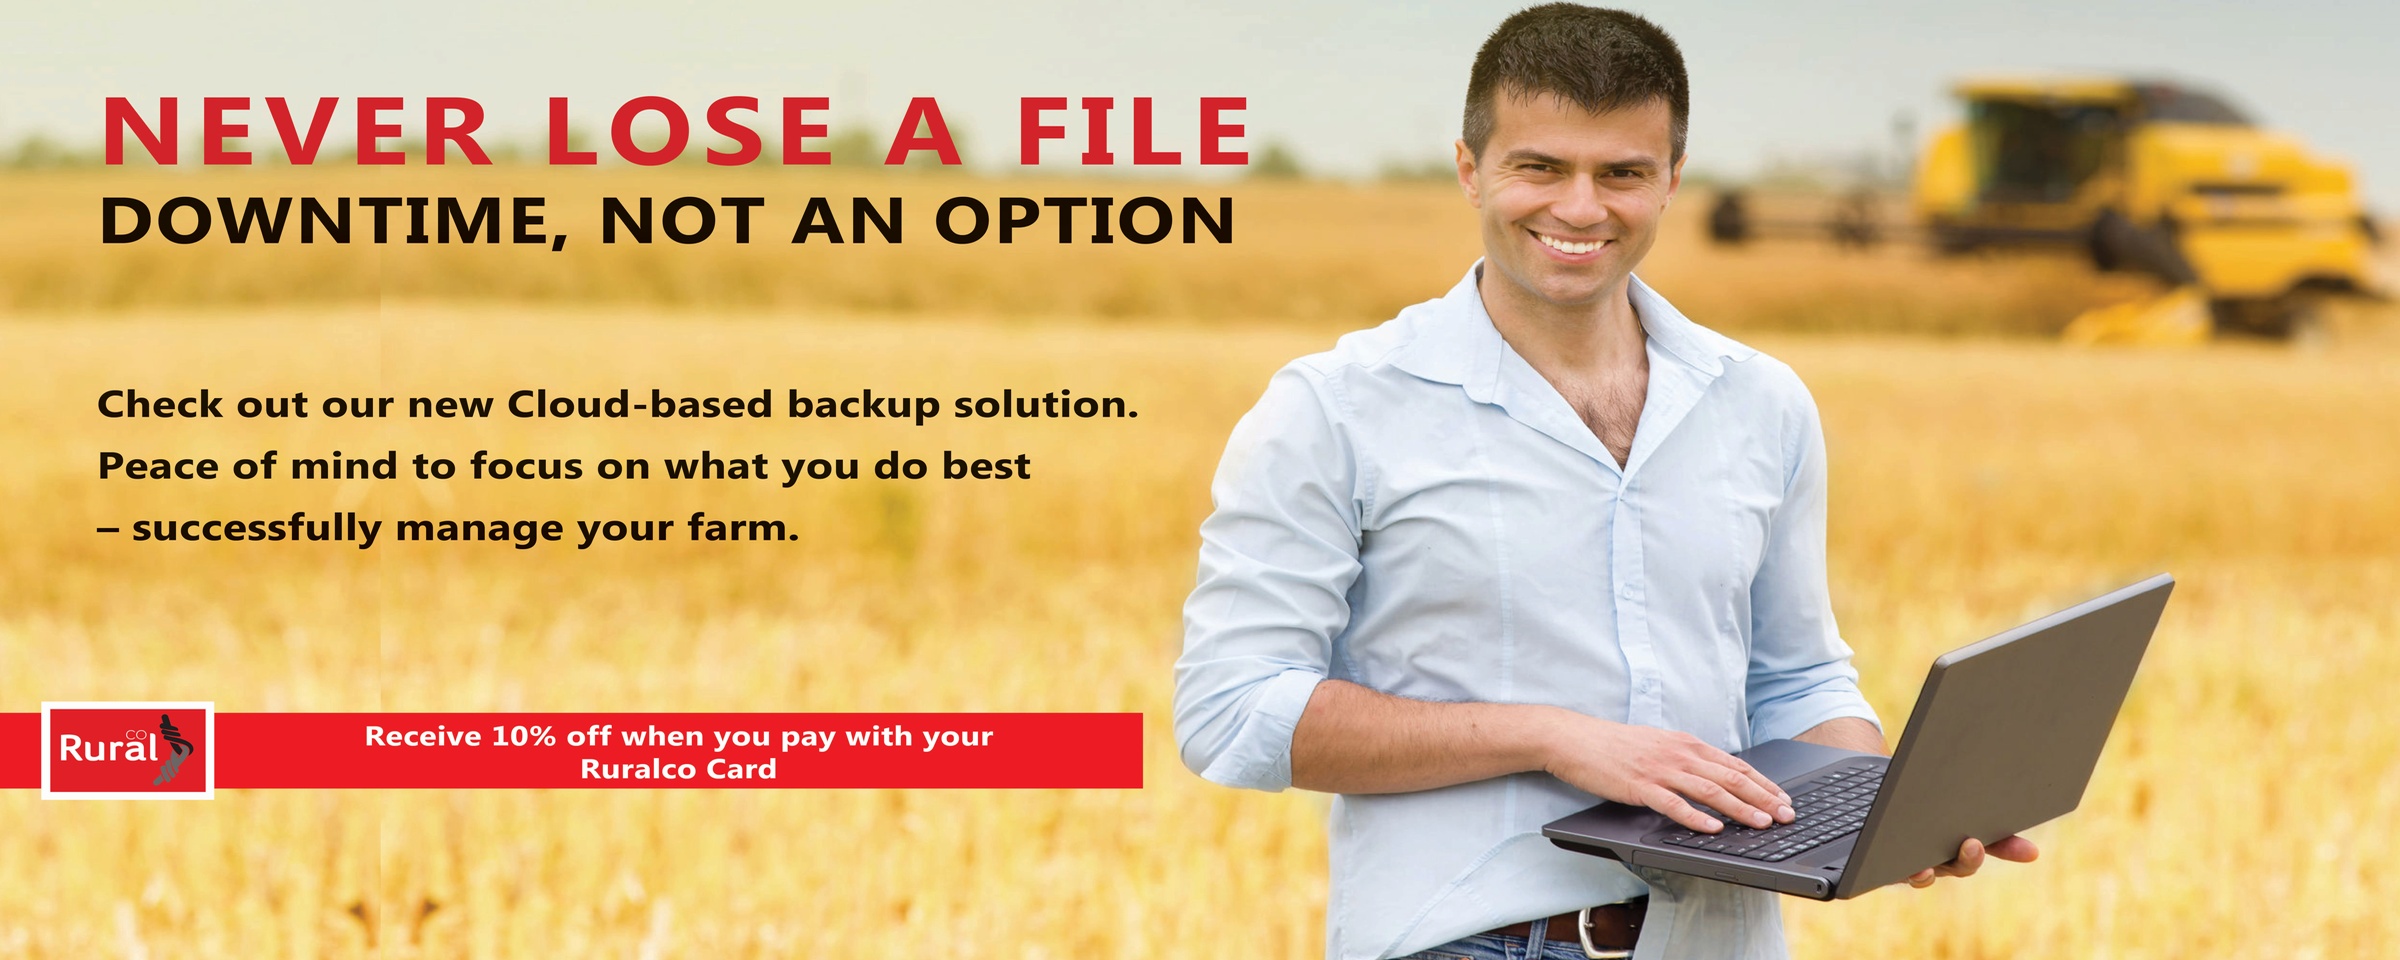 Never Lose a File. Downtime is not an option. Check out our new cloud based backup solutions. Peace of mind to focus on what you do best - manage your farm. Receive 10% off when you pay with your RuralCo Card.